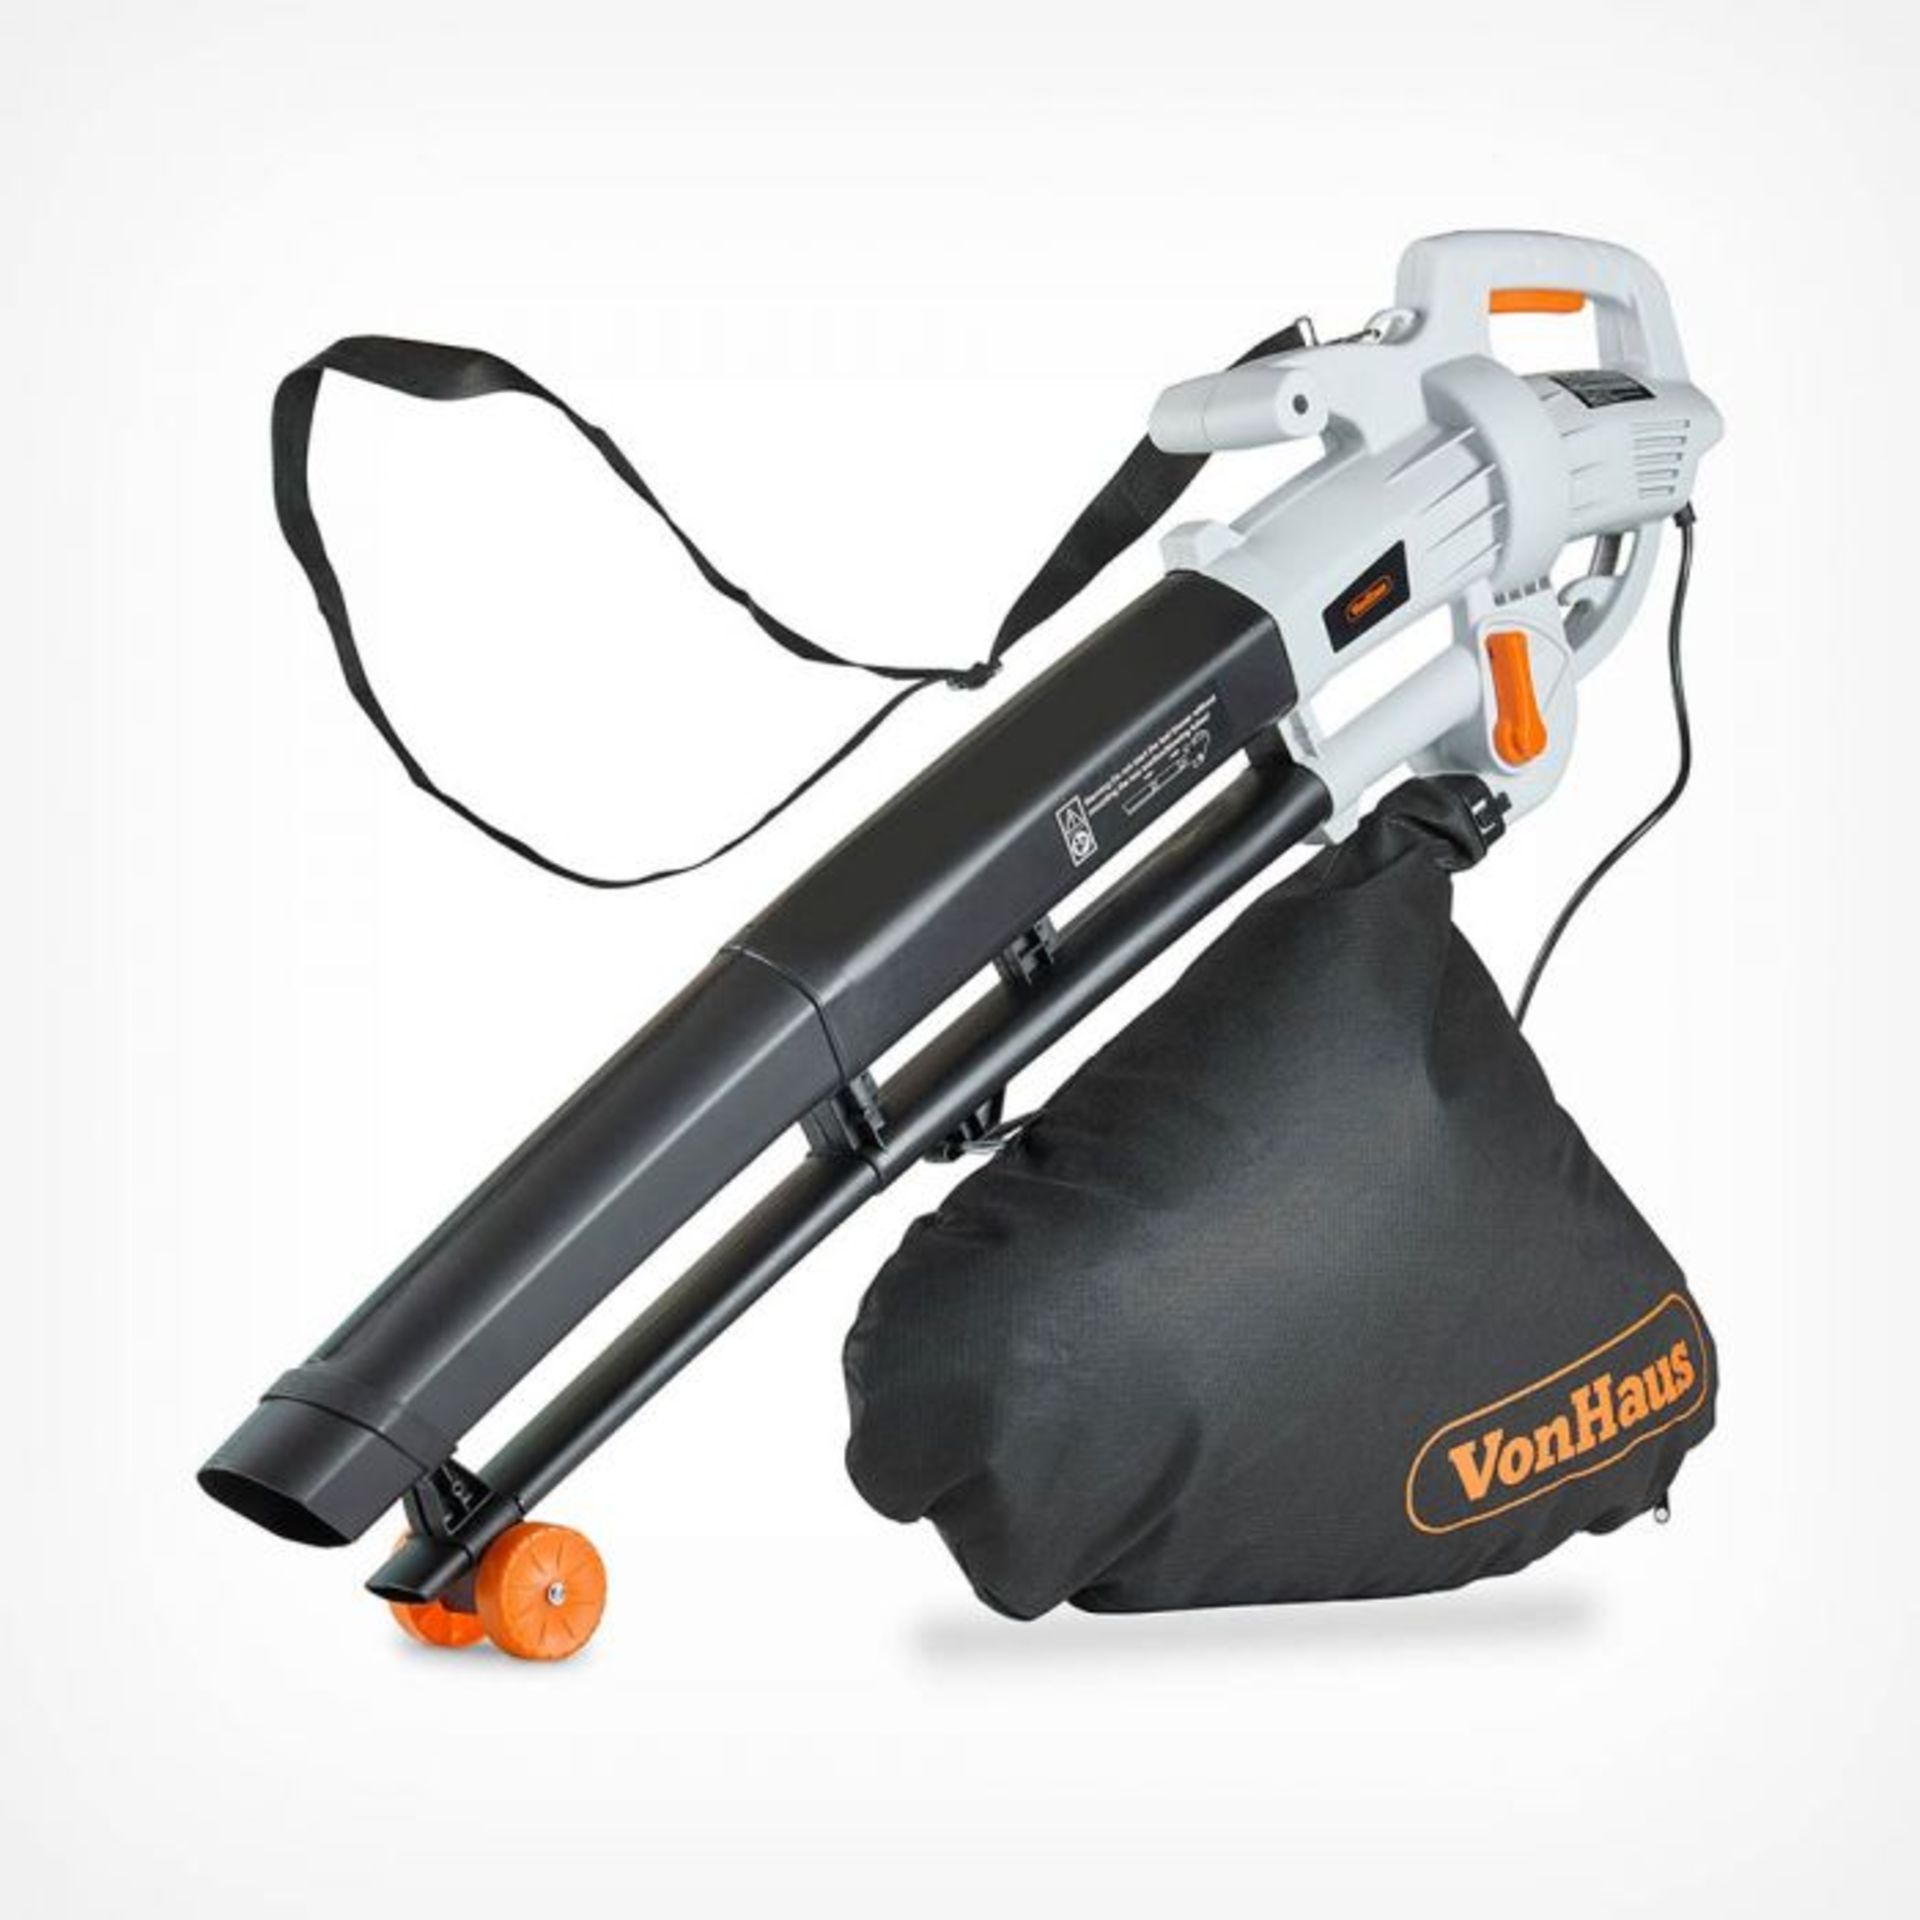 (V175) 3000W Leaf Blower Keep your garden tidy with the VonHaus Leaf Blower Powerful 3000W mo... - Image 2 of 5